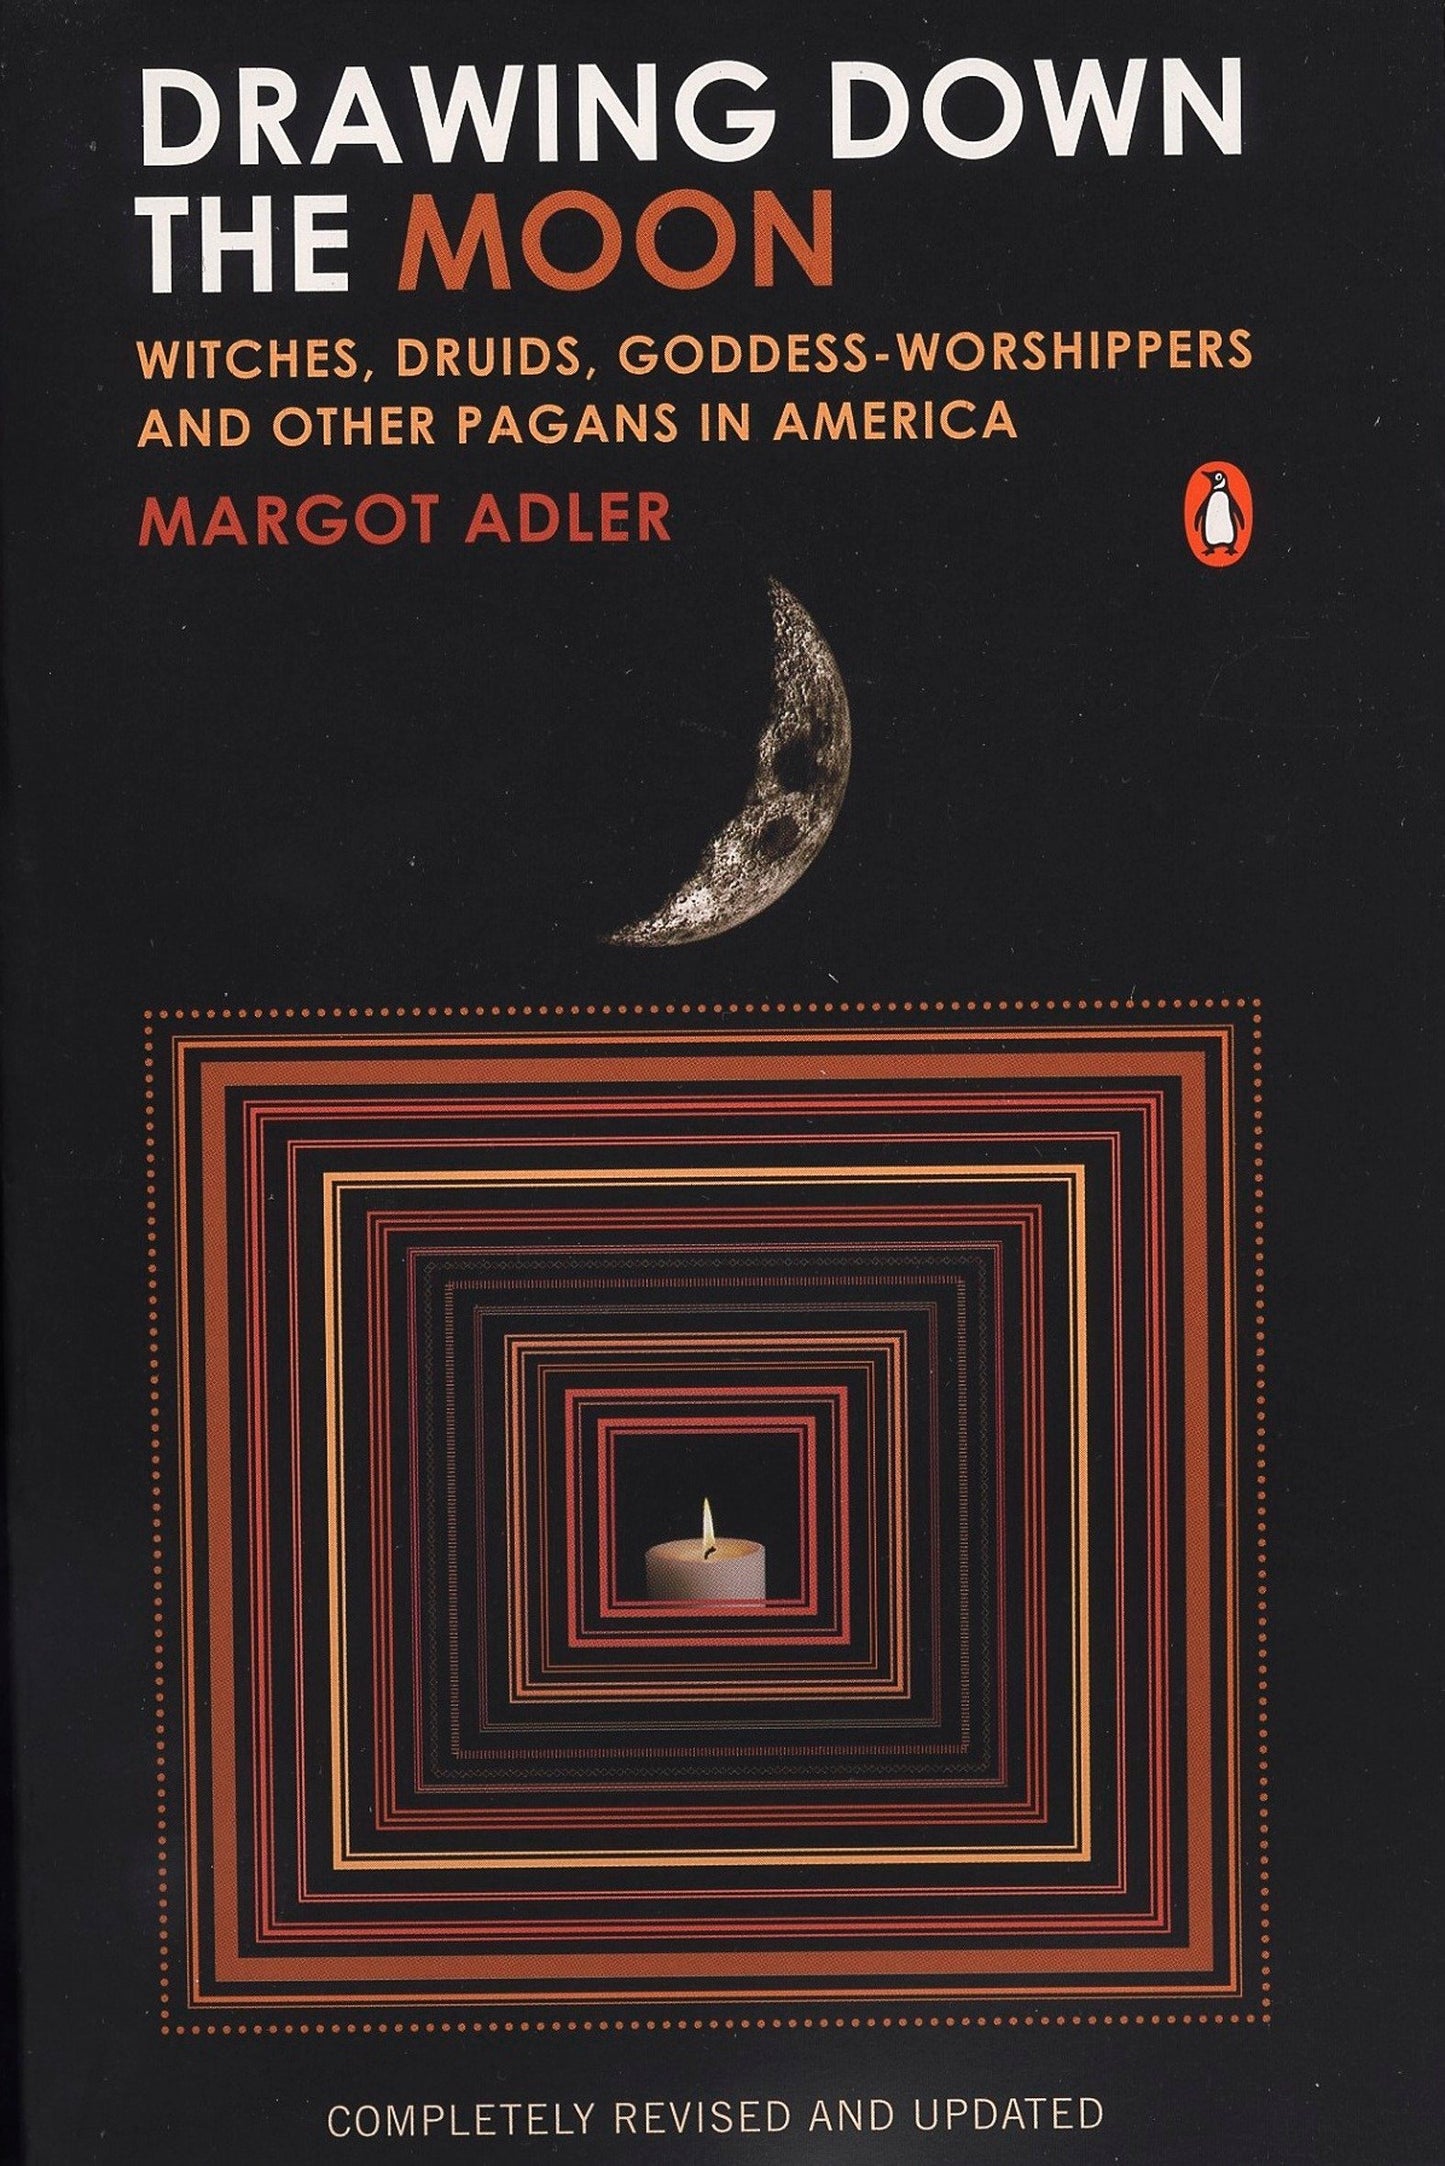 DRAWING DOWN THE MOON: WITCHES, DRUIDS, GODDESS-WORSHIPPERS AND OTHER PAGANS IN AMERICA